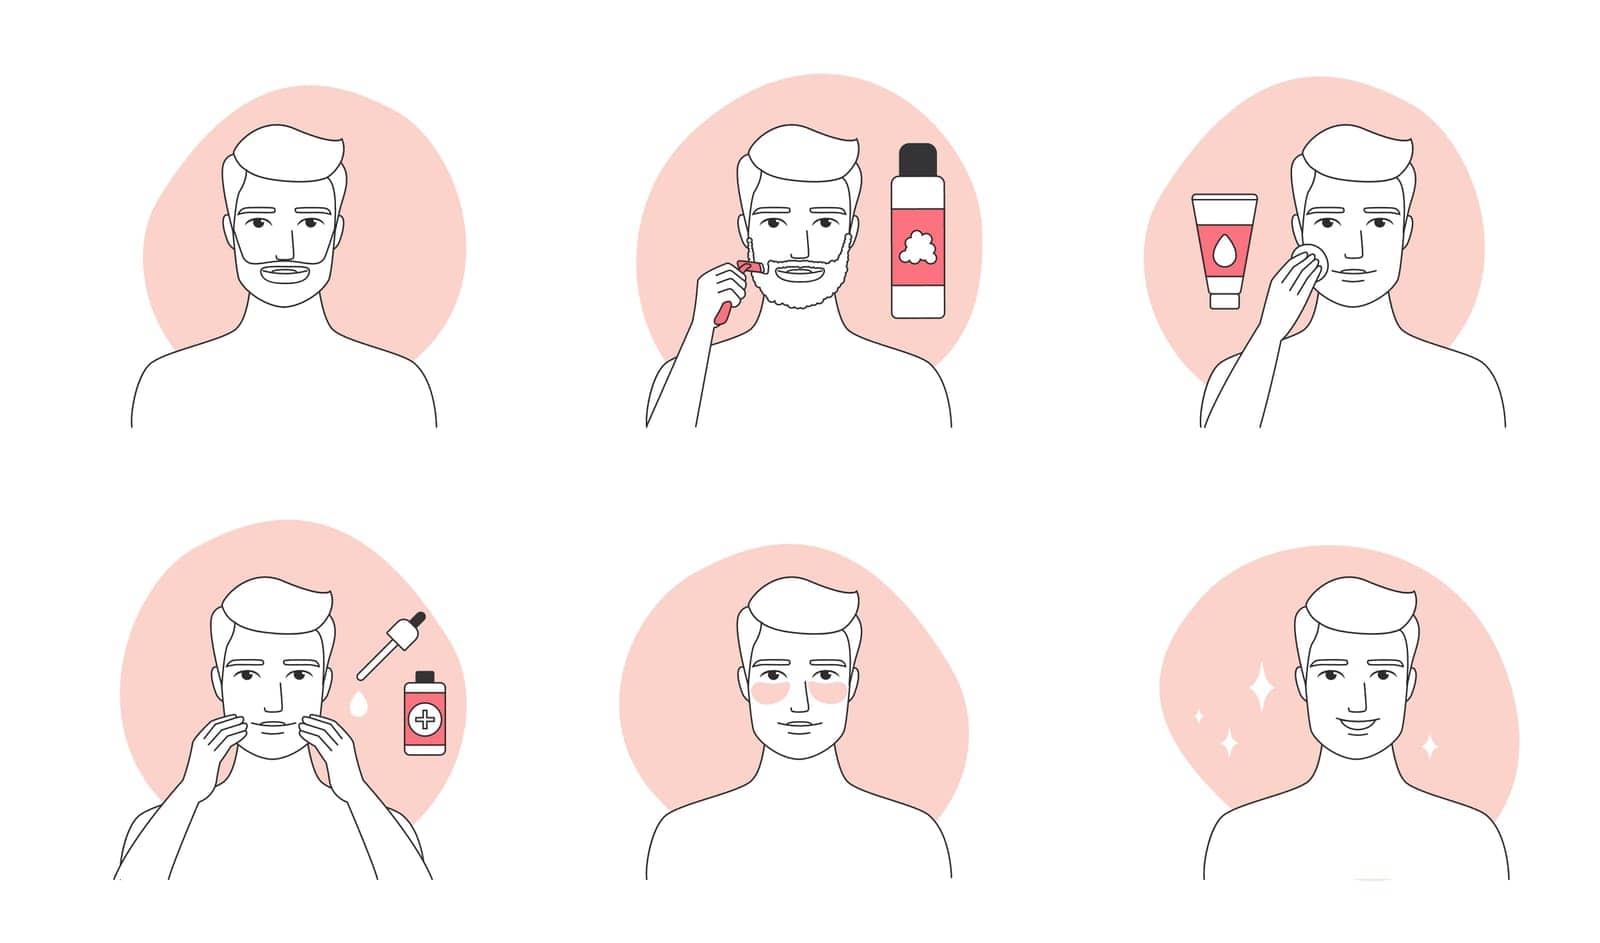 Skincare routine steps of man in bathroom, line icons set vector illustration. Hand drawn outline male characters shave with razor and mousse, apply cosmetic serum on face skin, lotion and eye patches